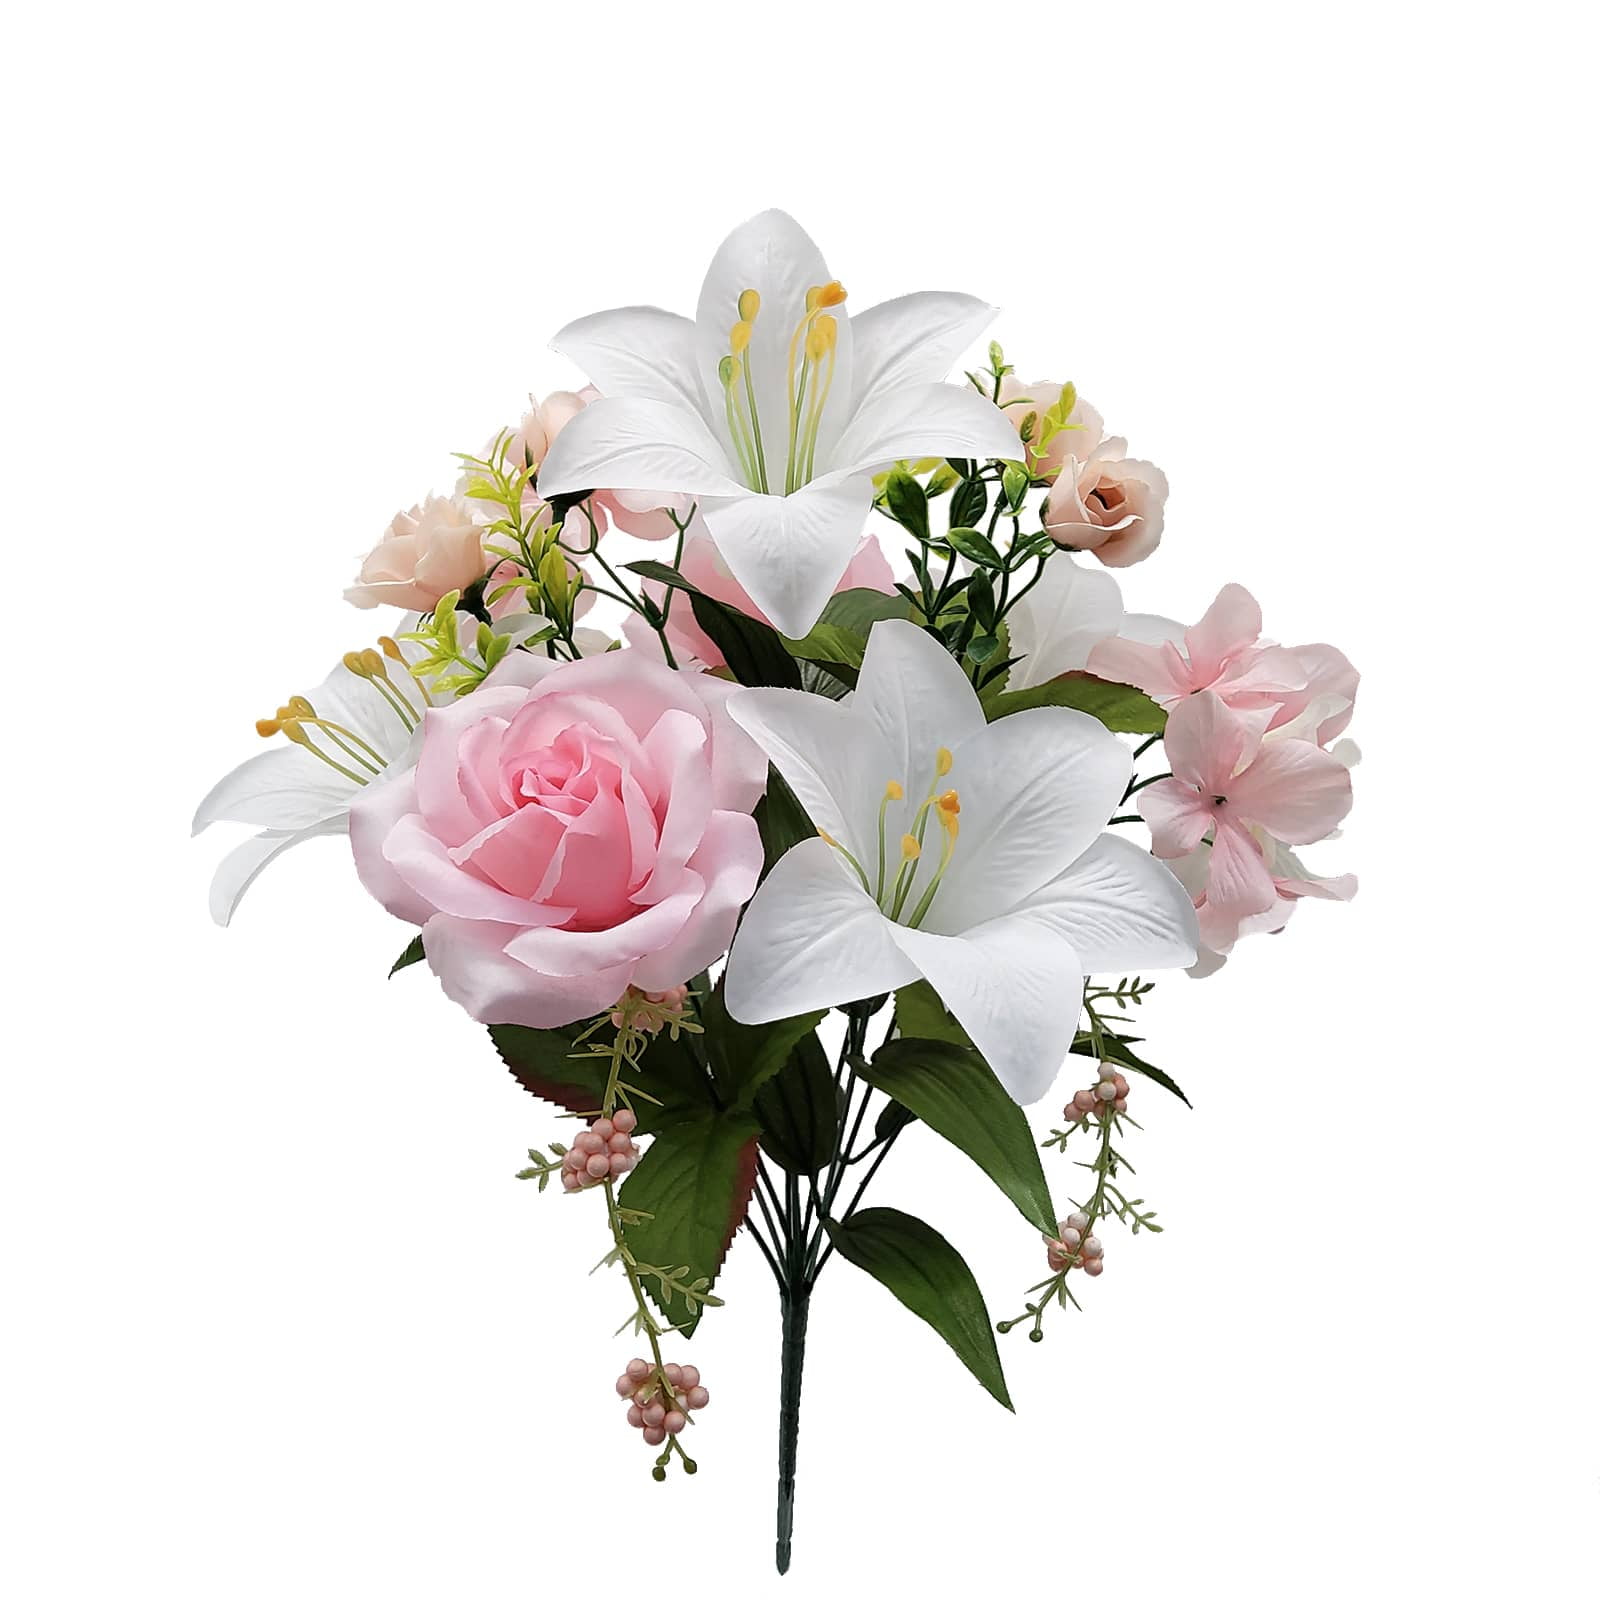 Mainstays Artificial Flower White Lily Rose Hydrangea Mixed Bush